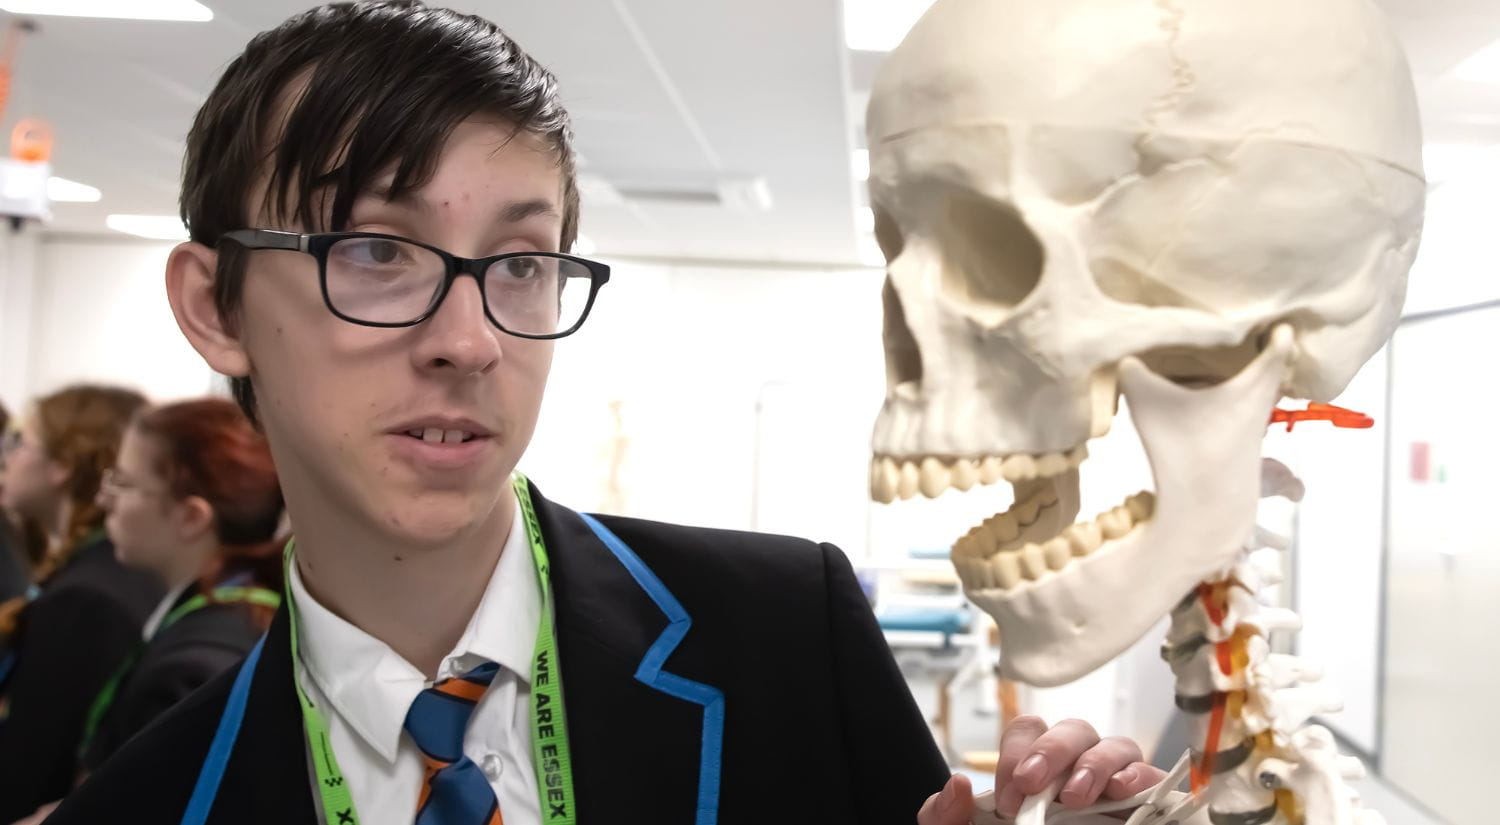 A Harwich and Dovercourt student says hello to a skull